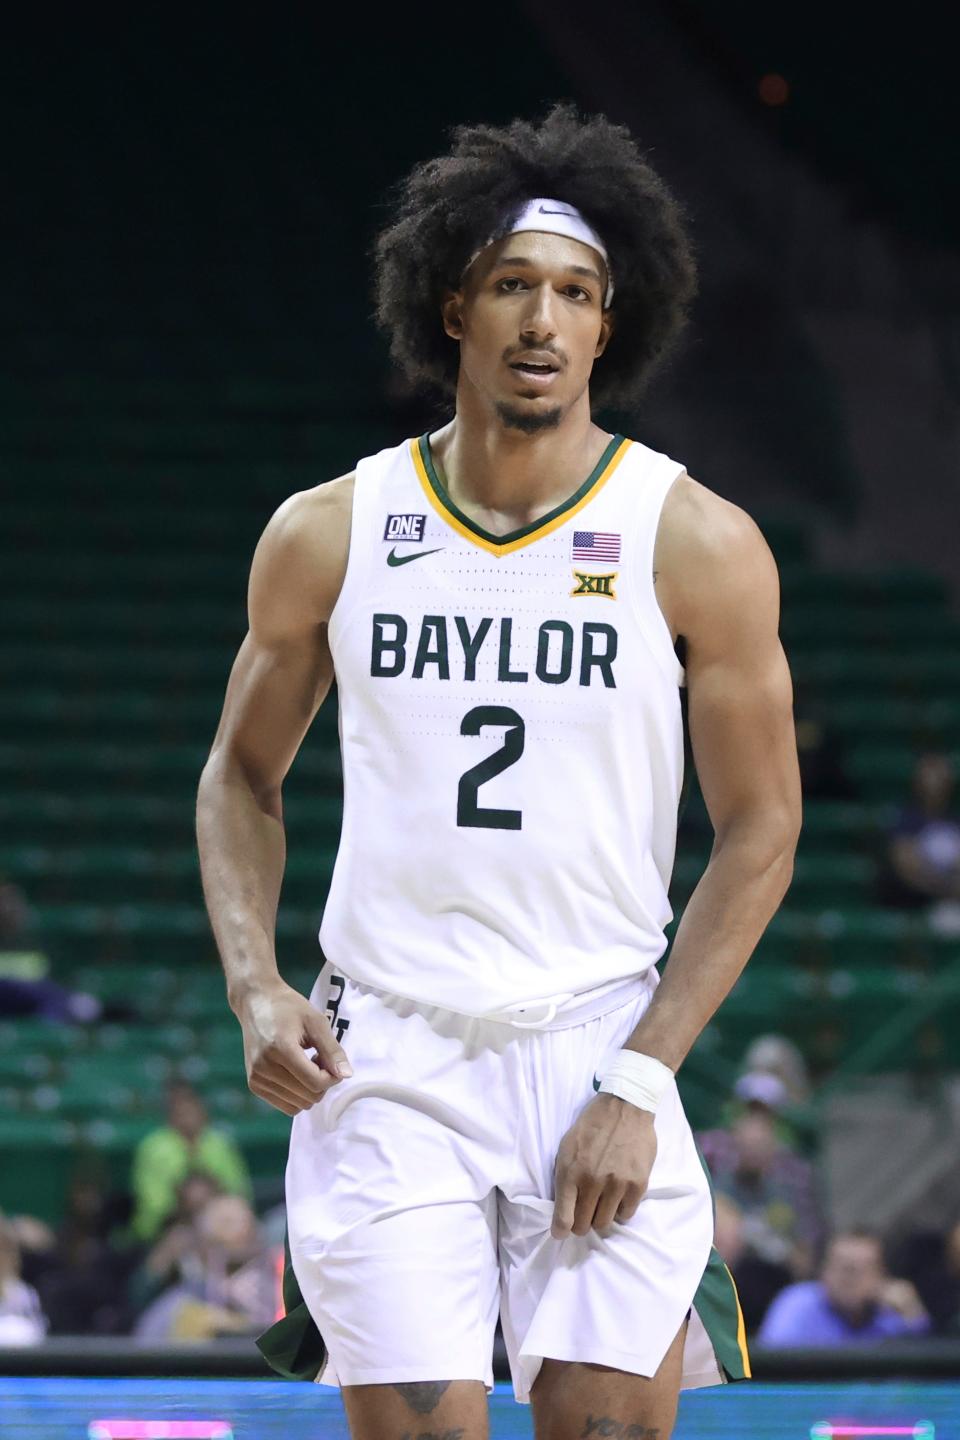 Baylor guard Kendall Brown waits for a play to begin against Nicholls State in the second half of an NCAA college basketball game, Monday, Nov. 15, 2021, in Waco, Texas. (AP Photo/Rod Aydelotte)